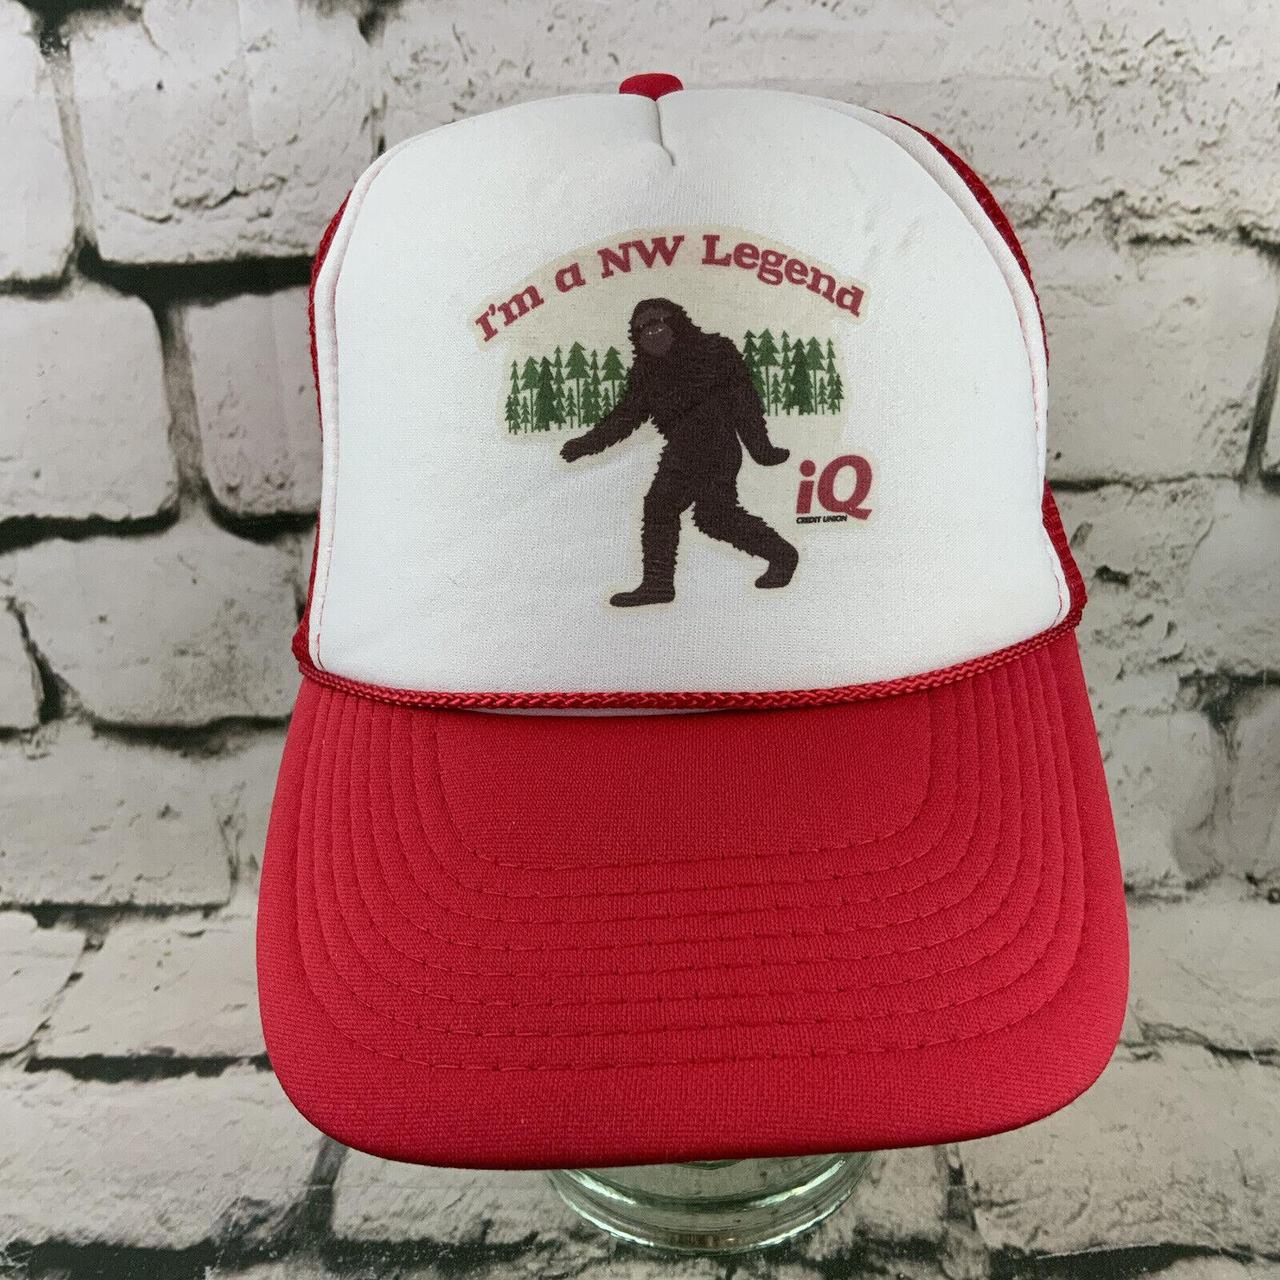 Lotto Men's White and Red Hat